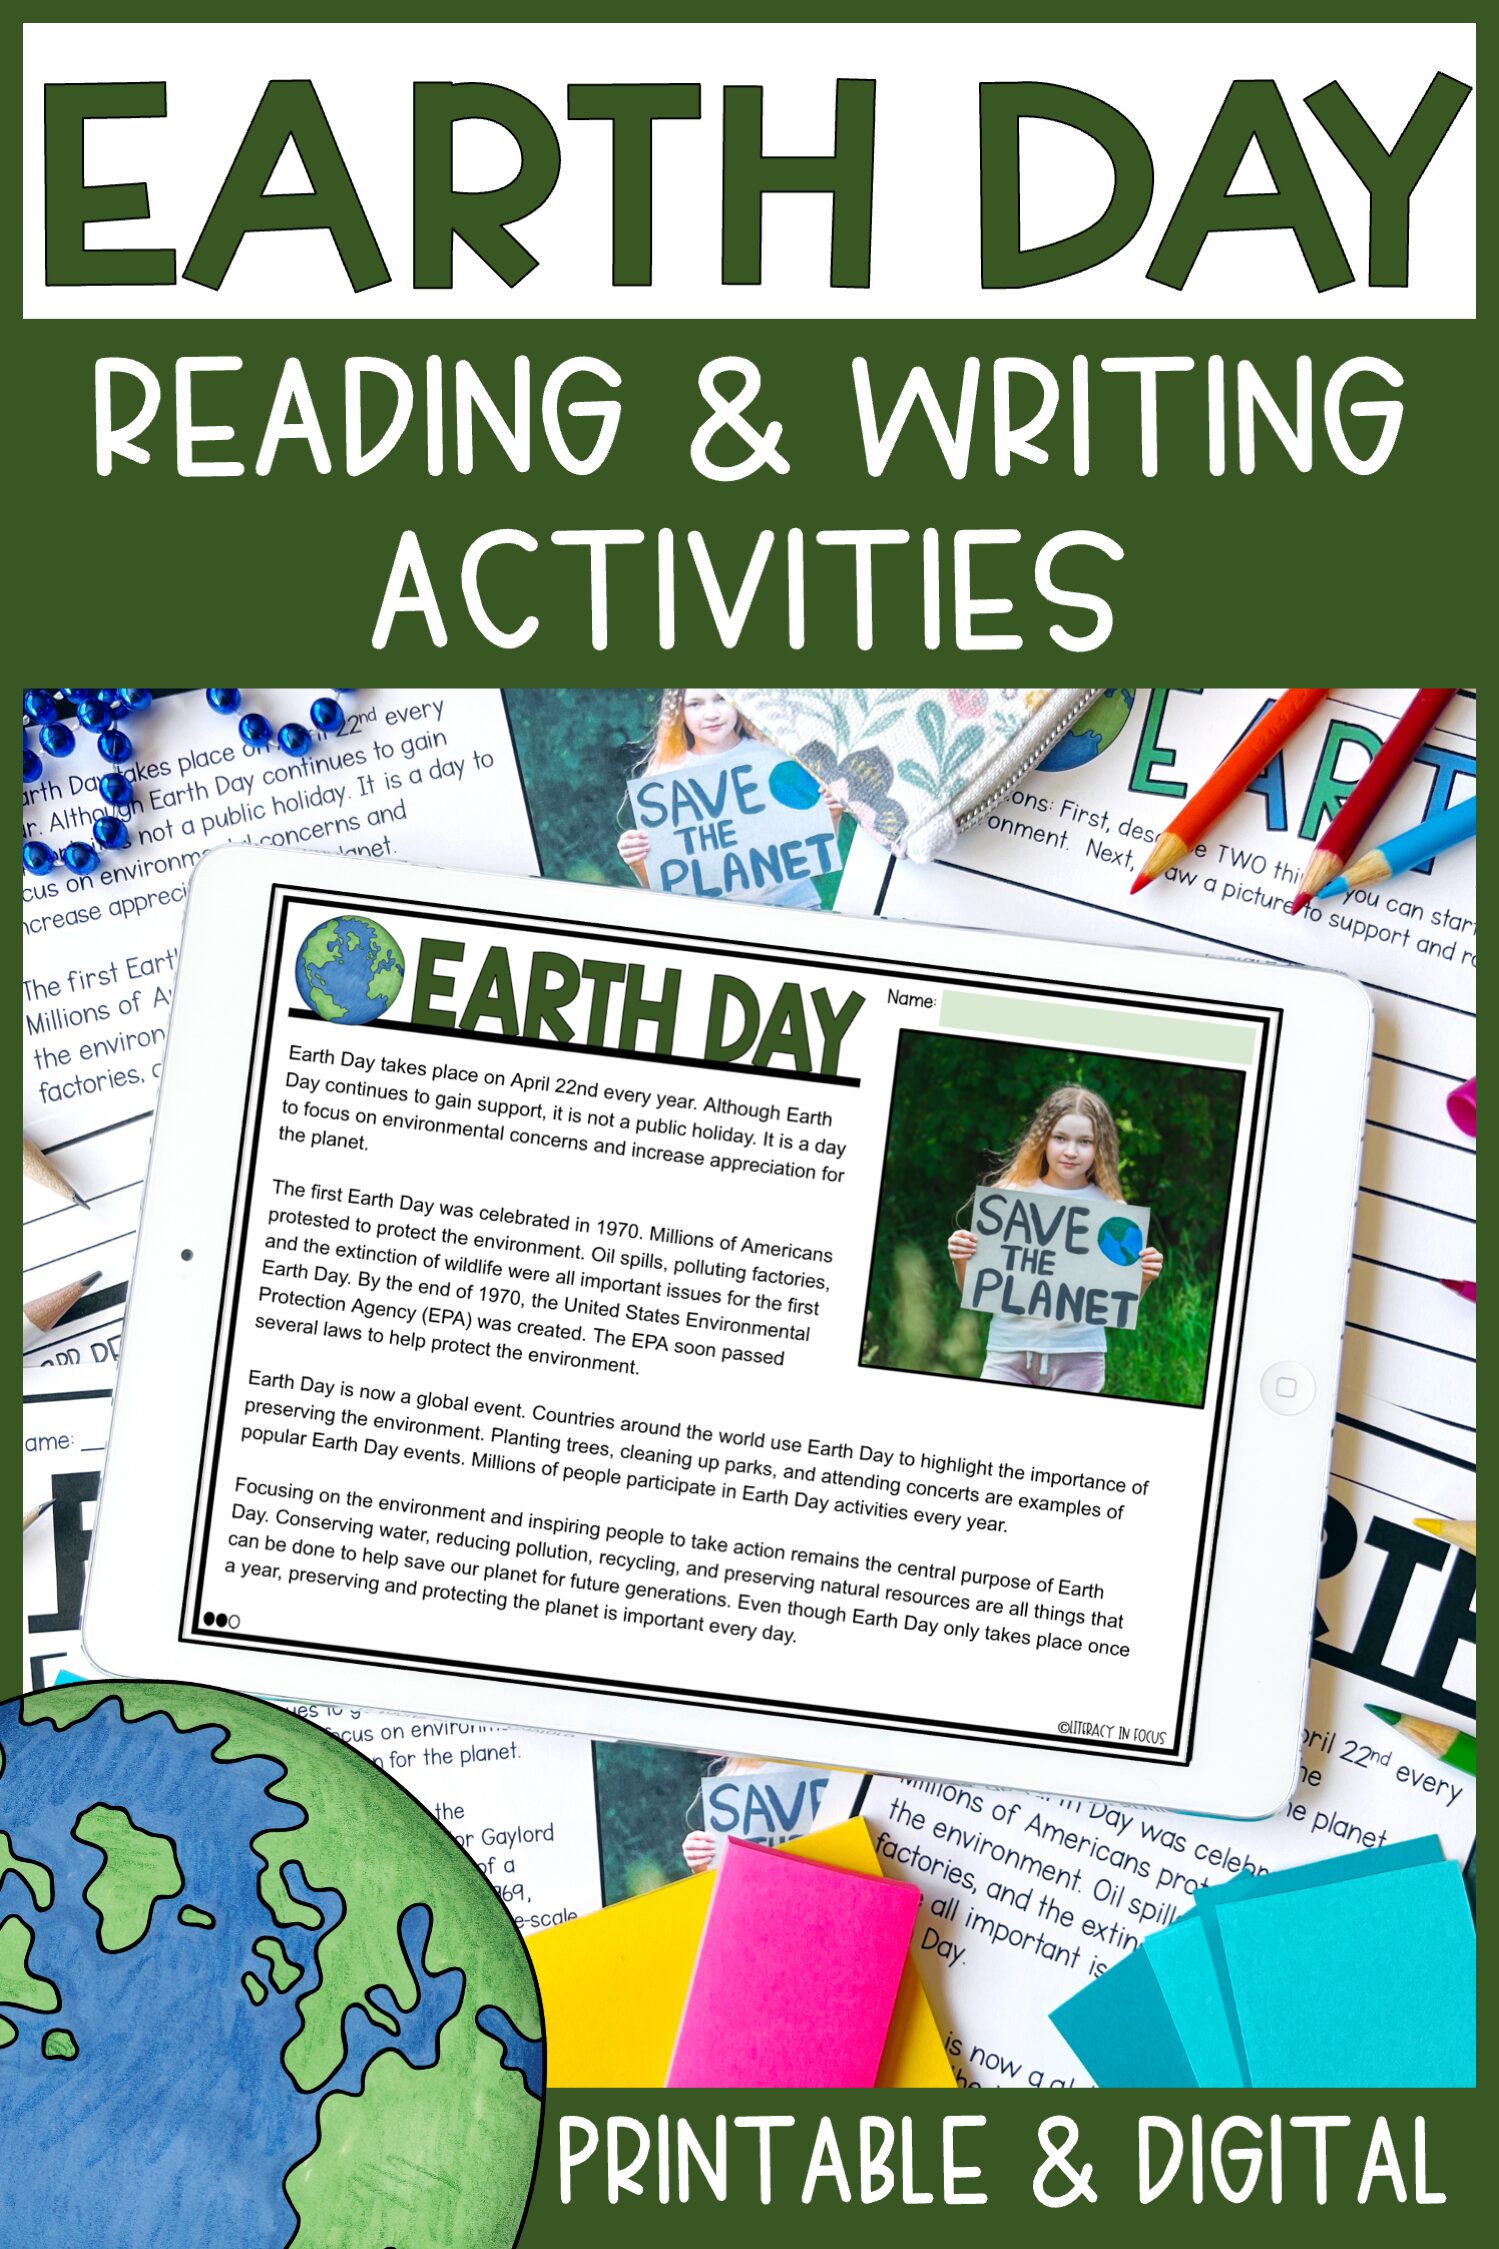 Earth Day Reading and Writing Activities